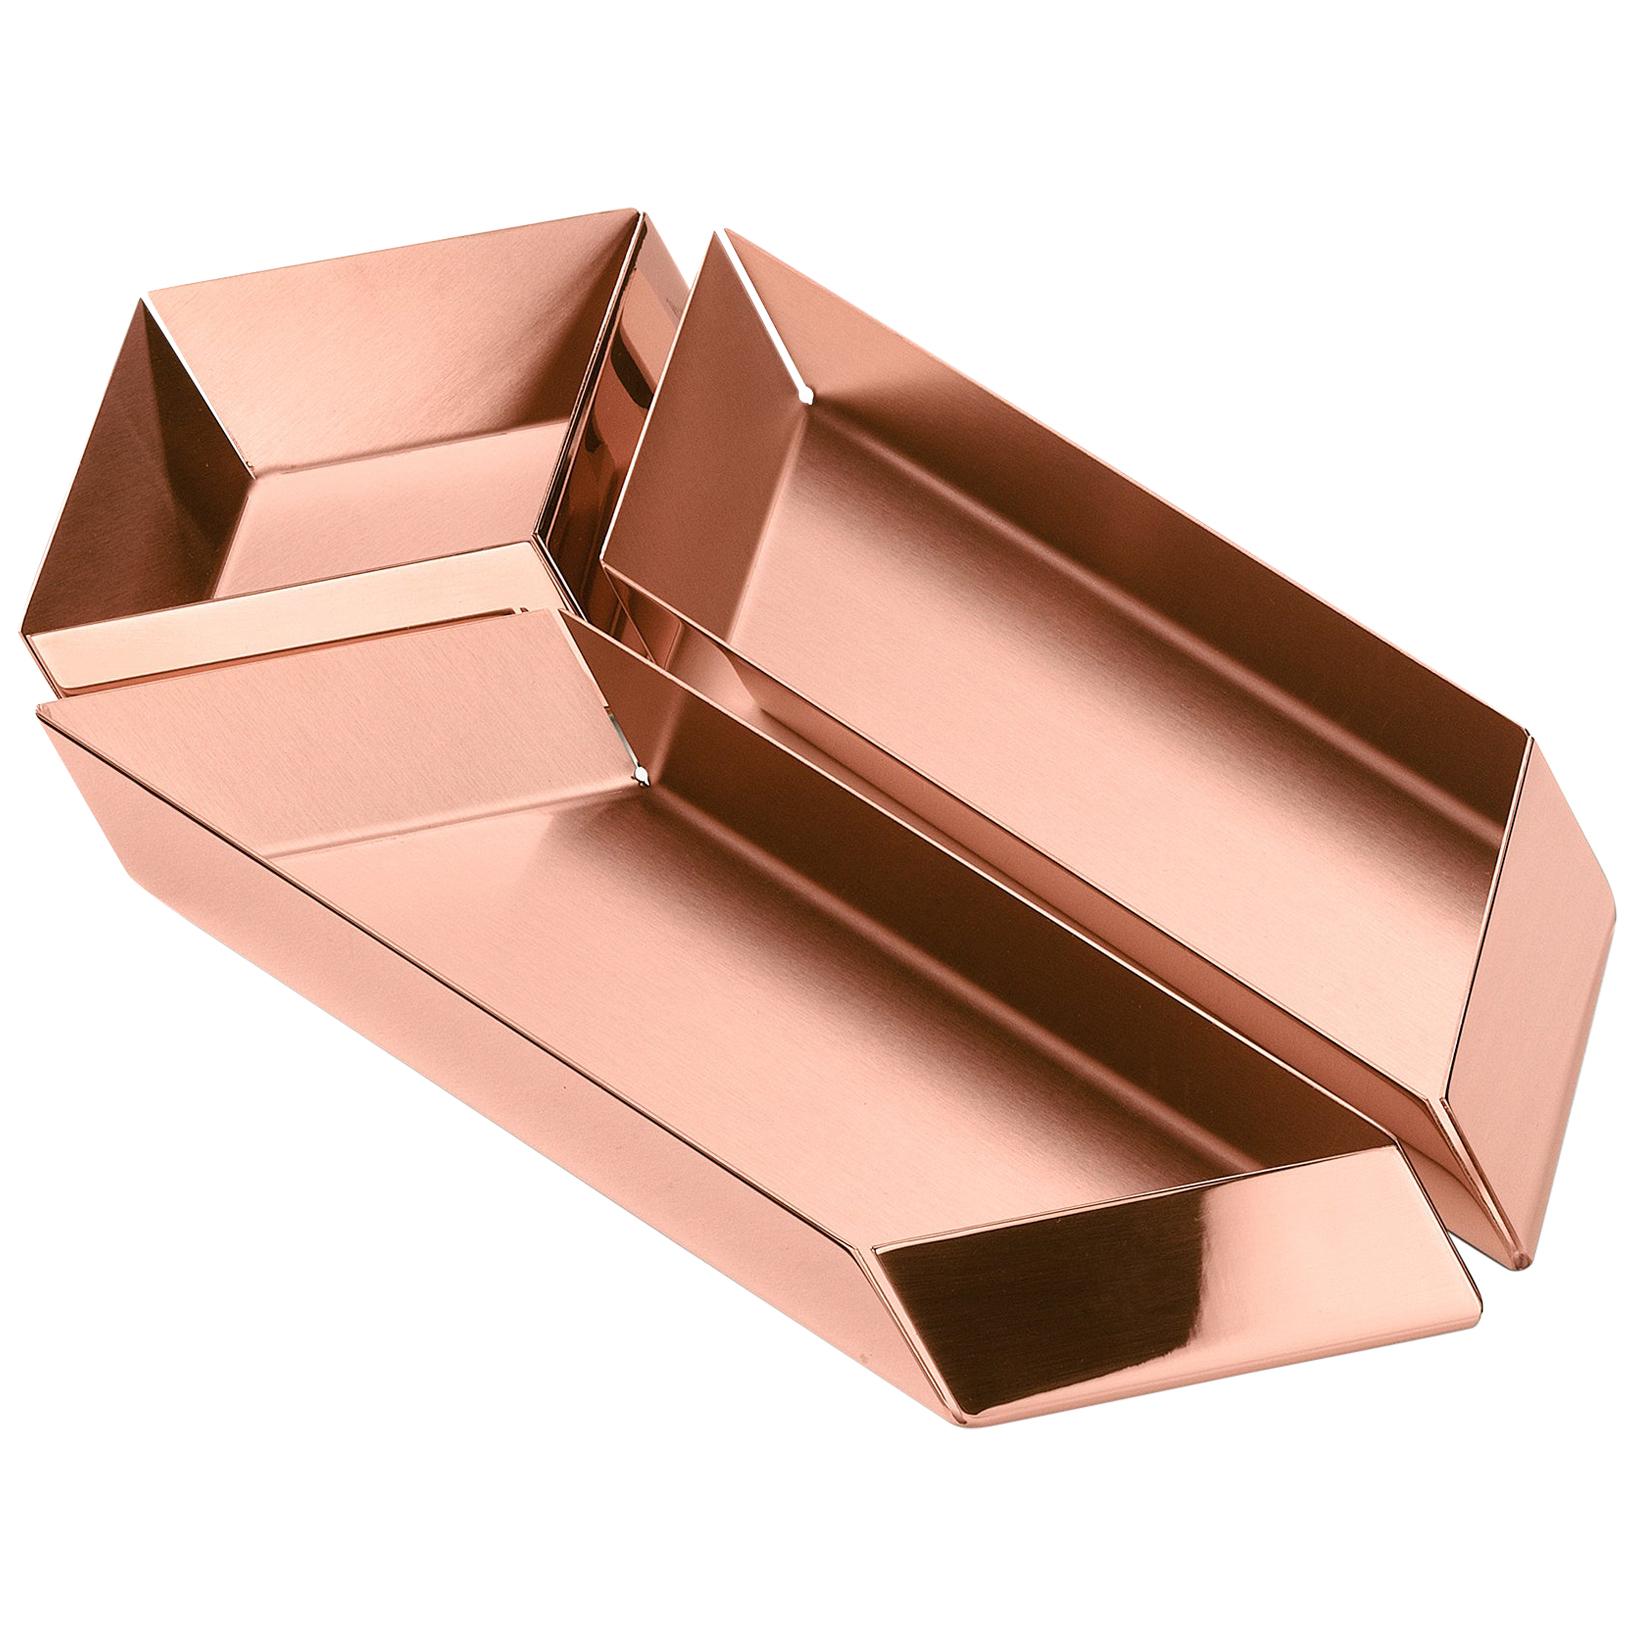 Ghidini 1961 Axonometry Small Parallelepiped Tray in Copper by Elisa Giovanni